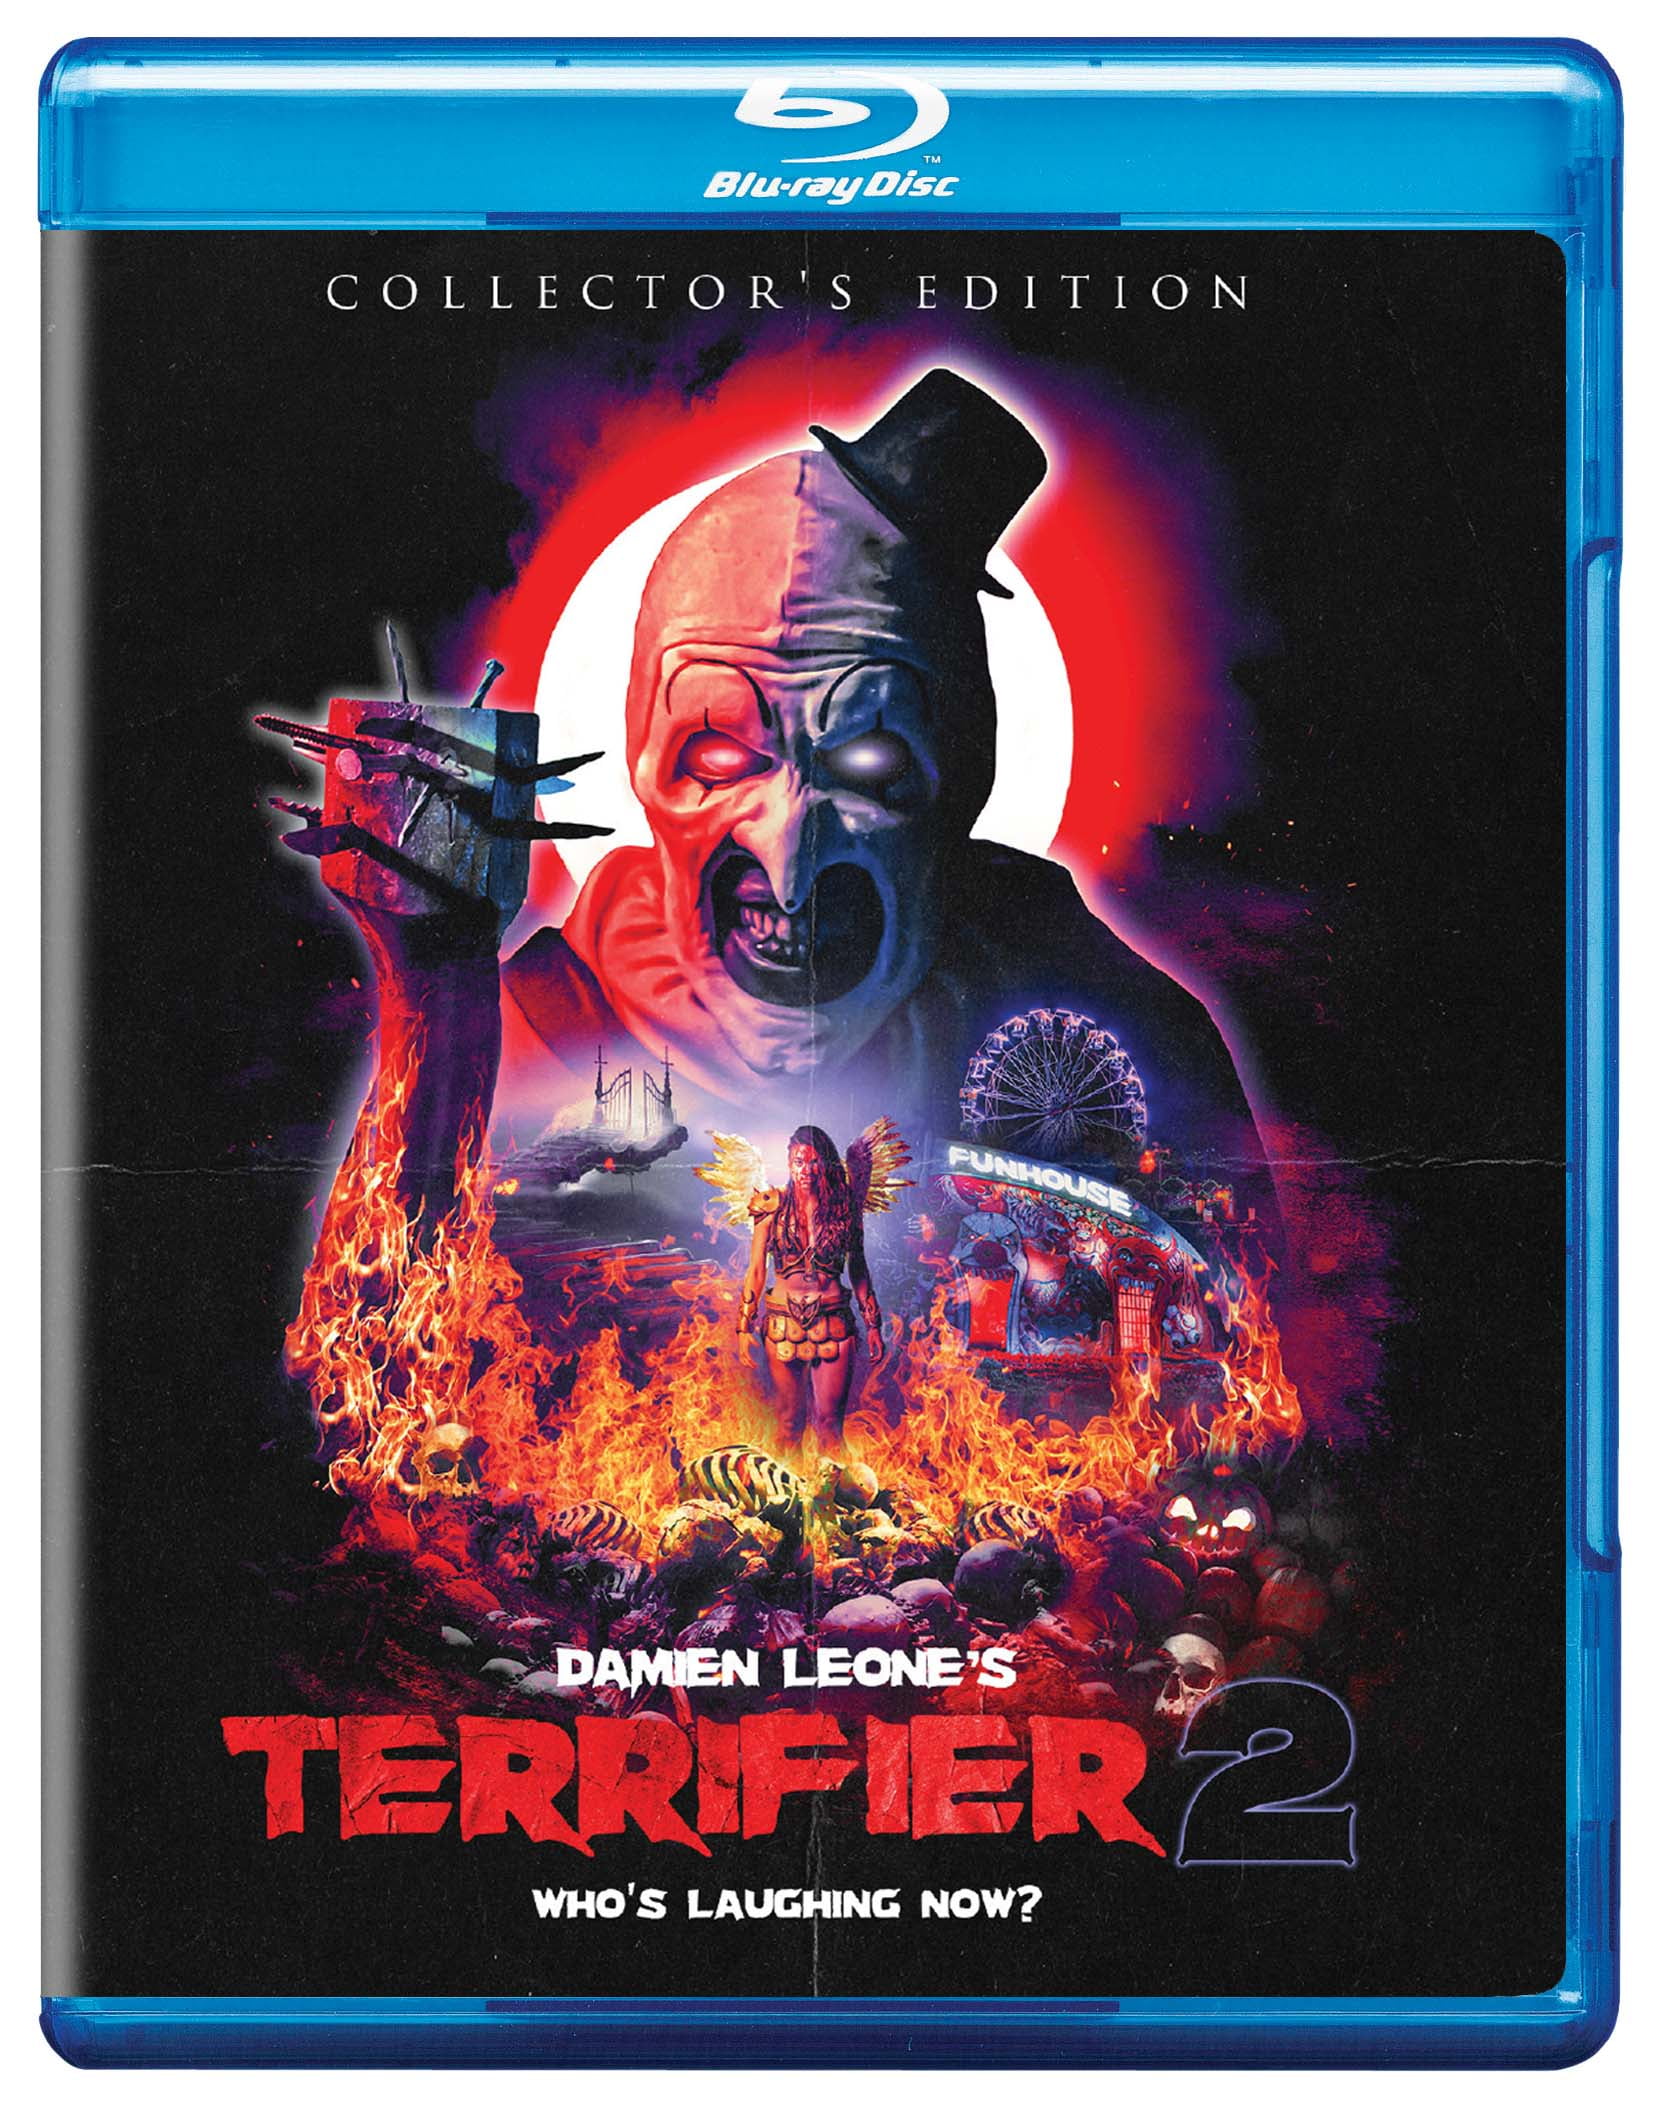 Terrifier 2: Limited Collector's Edition (Blu-ray)